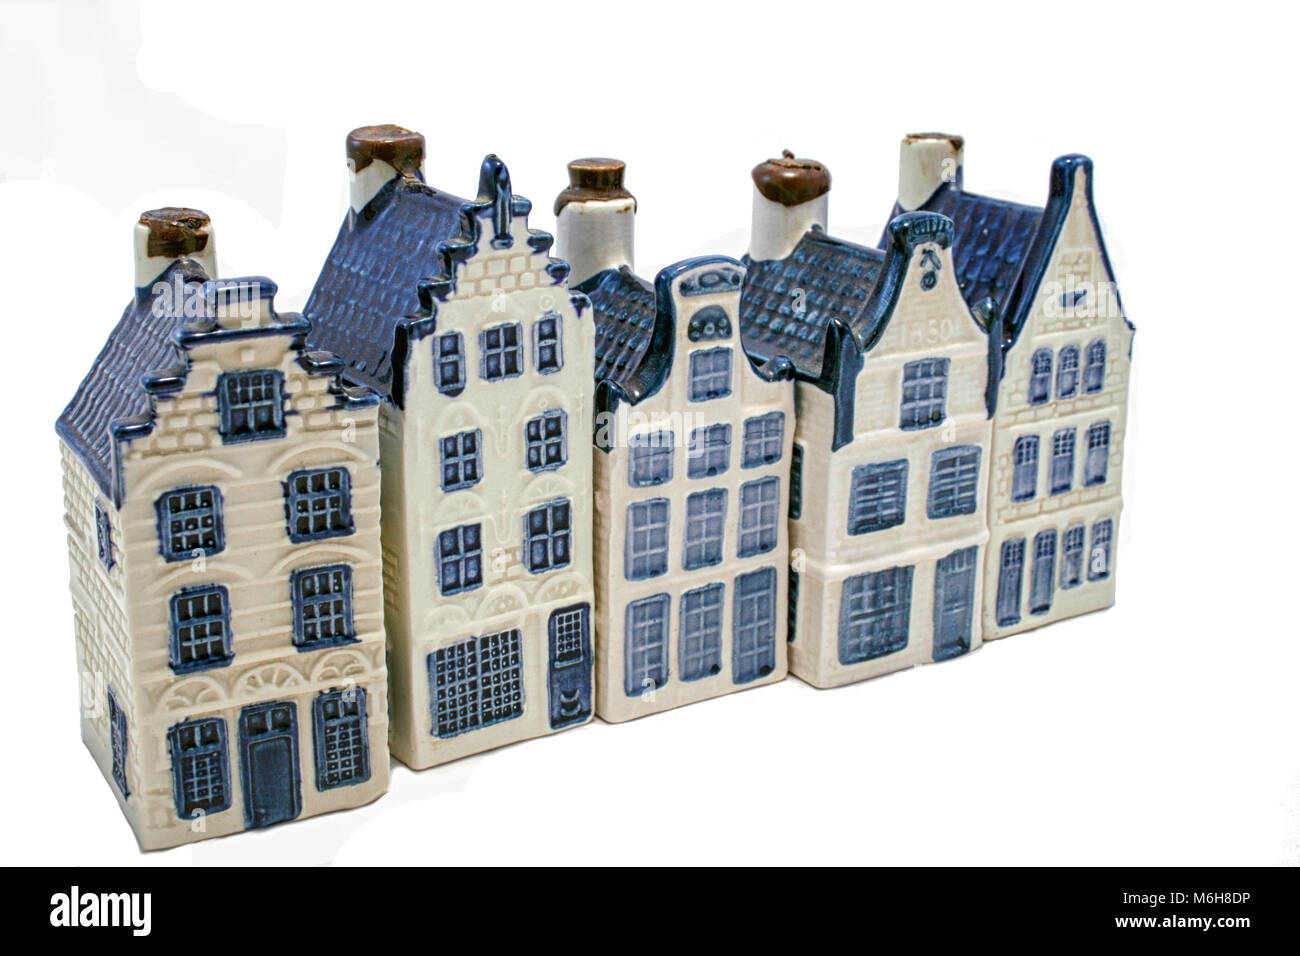 Dutch Delft blue houses in a row Stock Photo